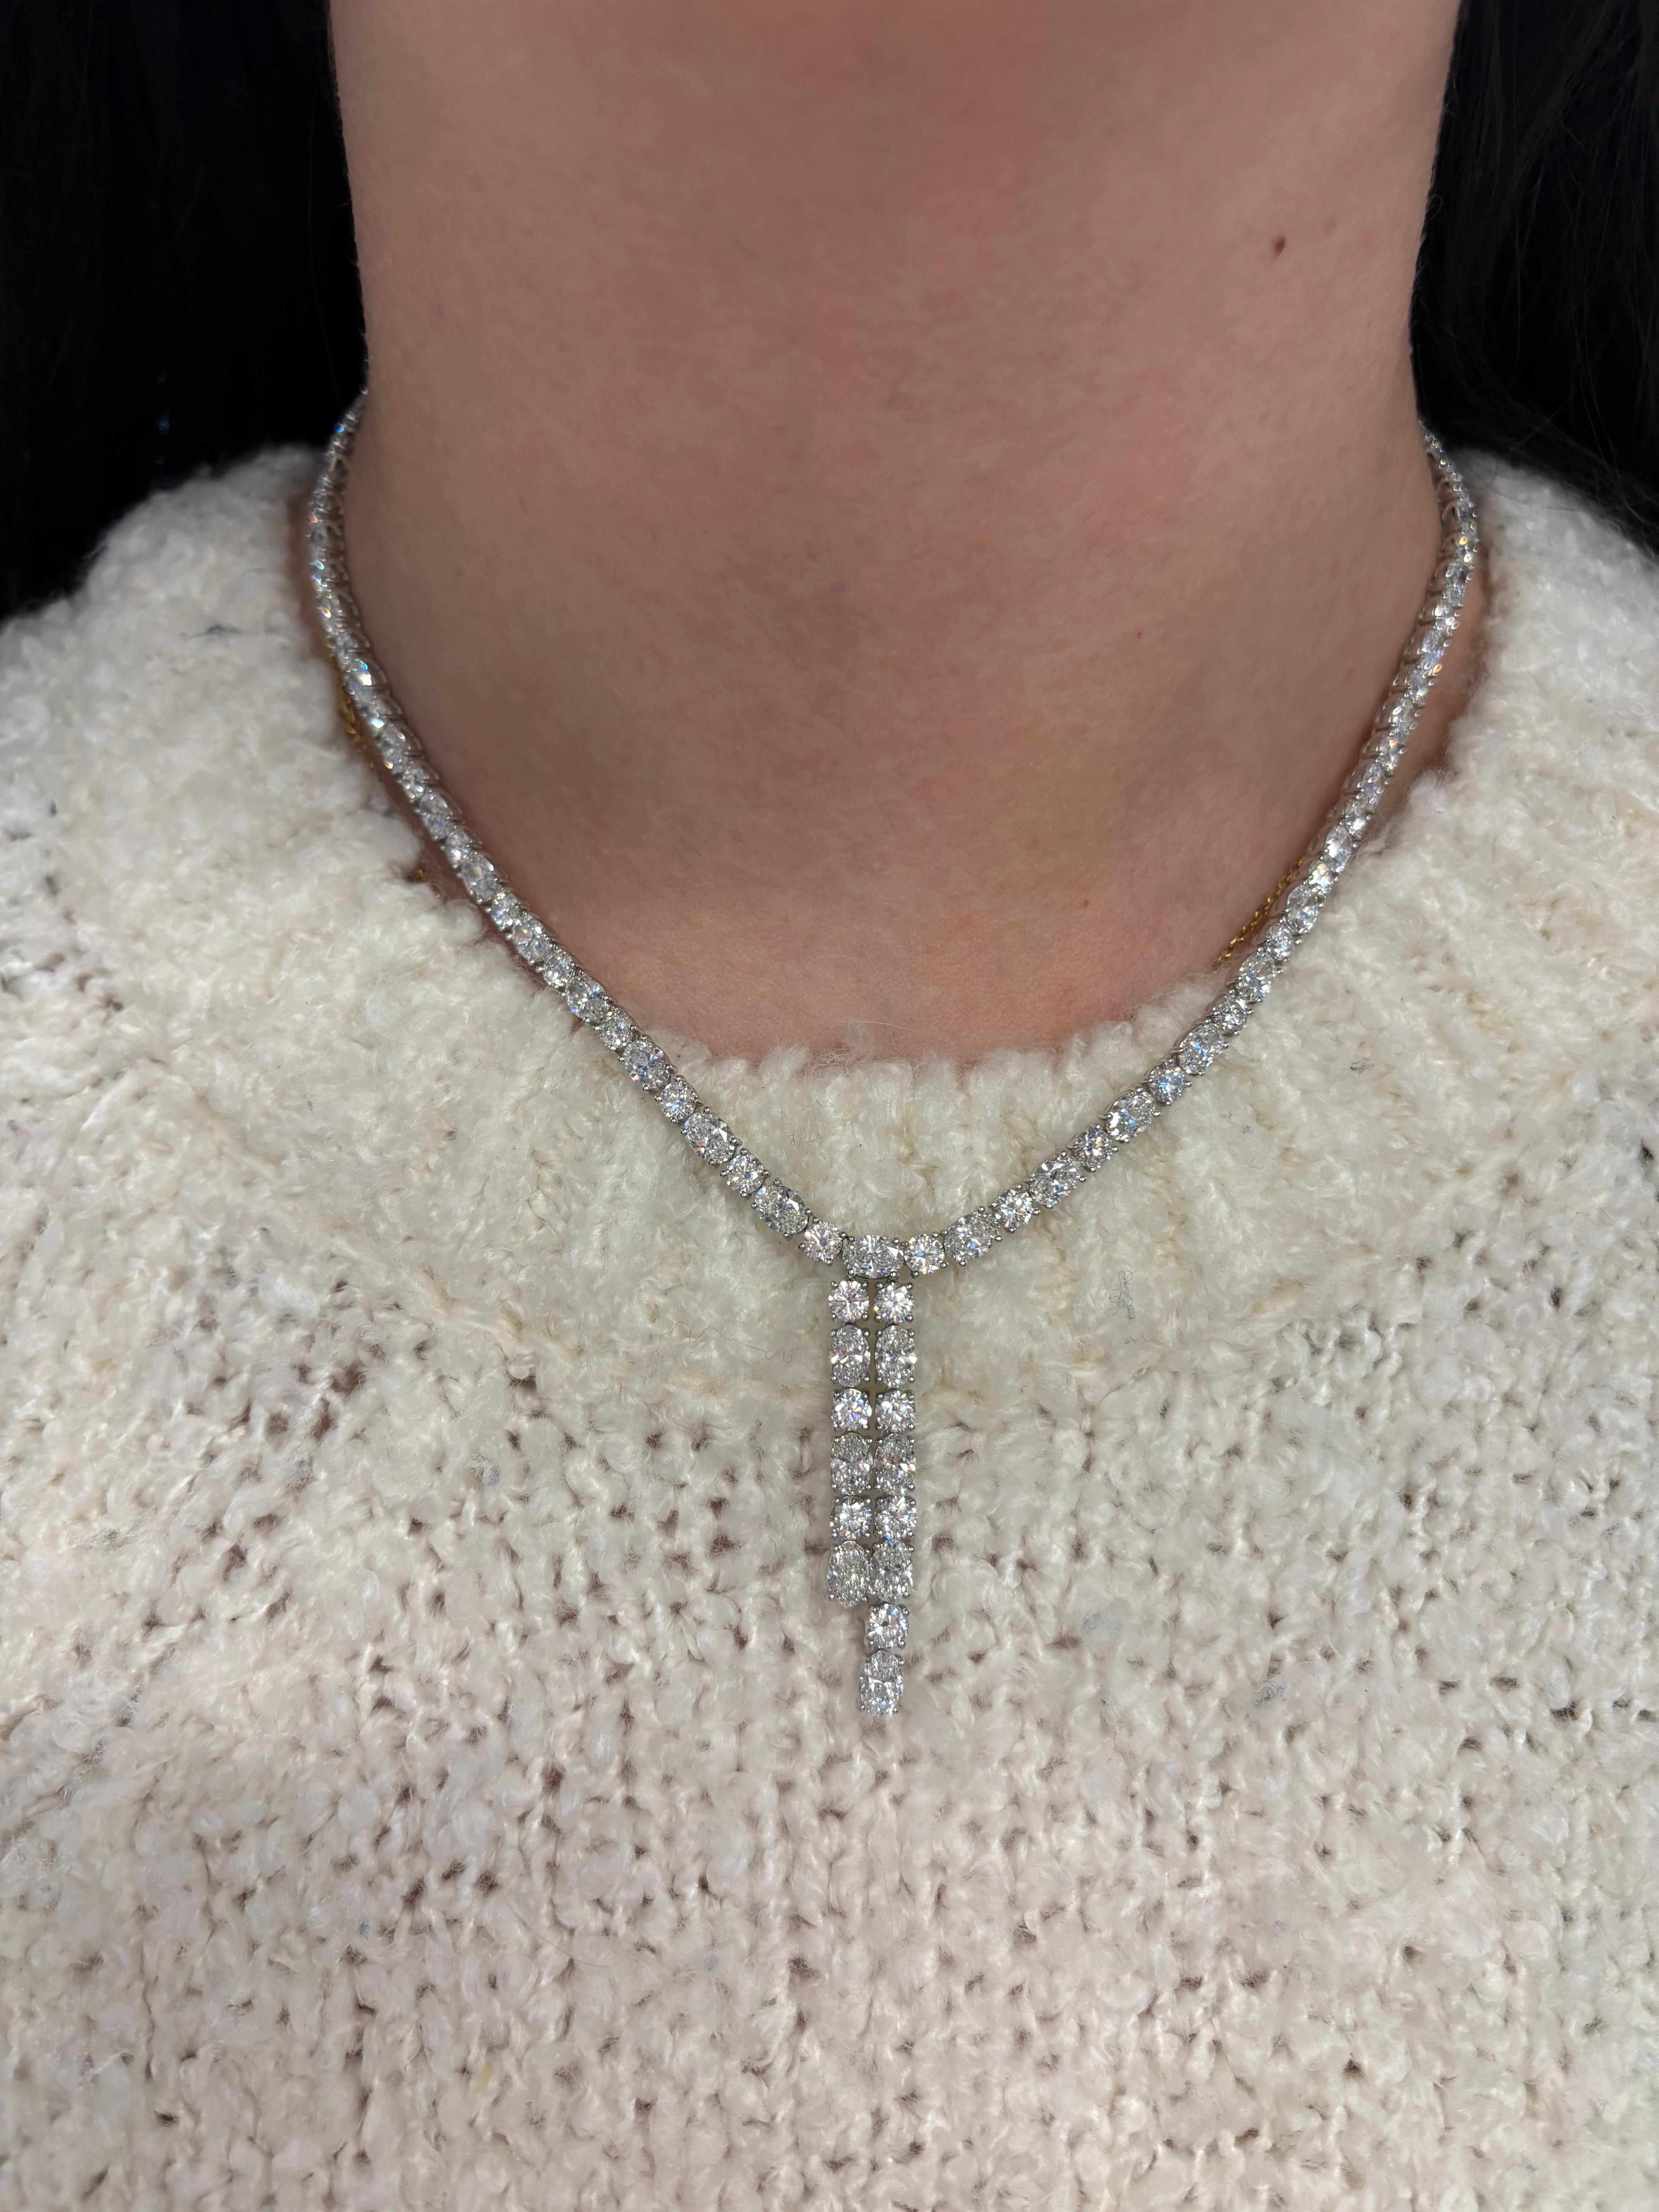 Exquisite diamond bow motif drop necklace, by Alexander Beverly Hills.
25.09 carats total diamond weight.
50 oval brilliant diamonds, 15.74 carats. 50 round brilliant diamonds, 9.35 carats. Approximately G-I color and VS1-SI1 clarity. Prong set in